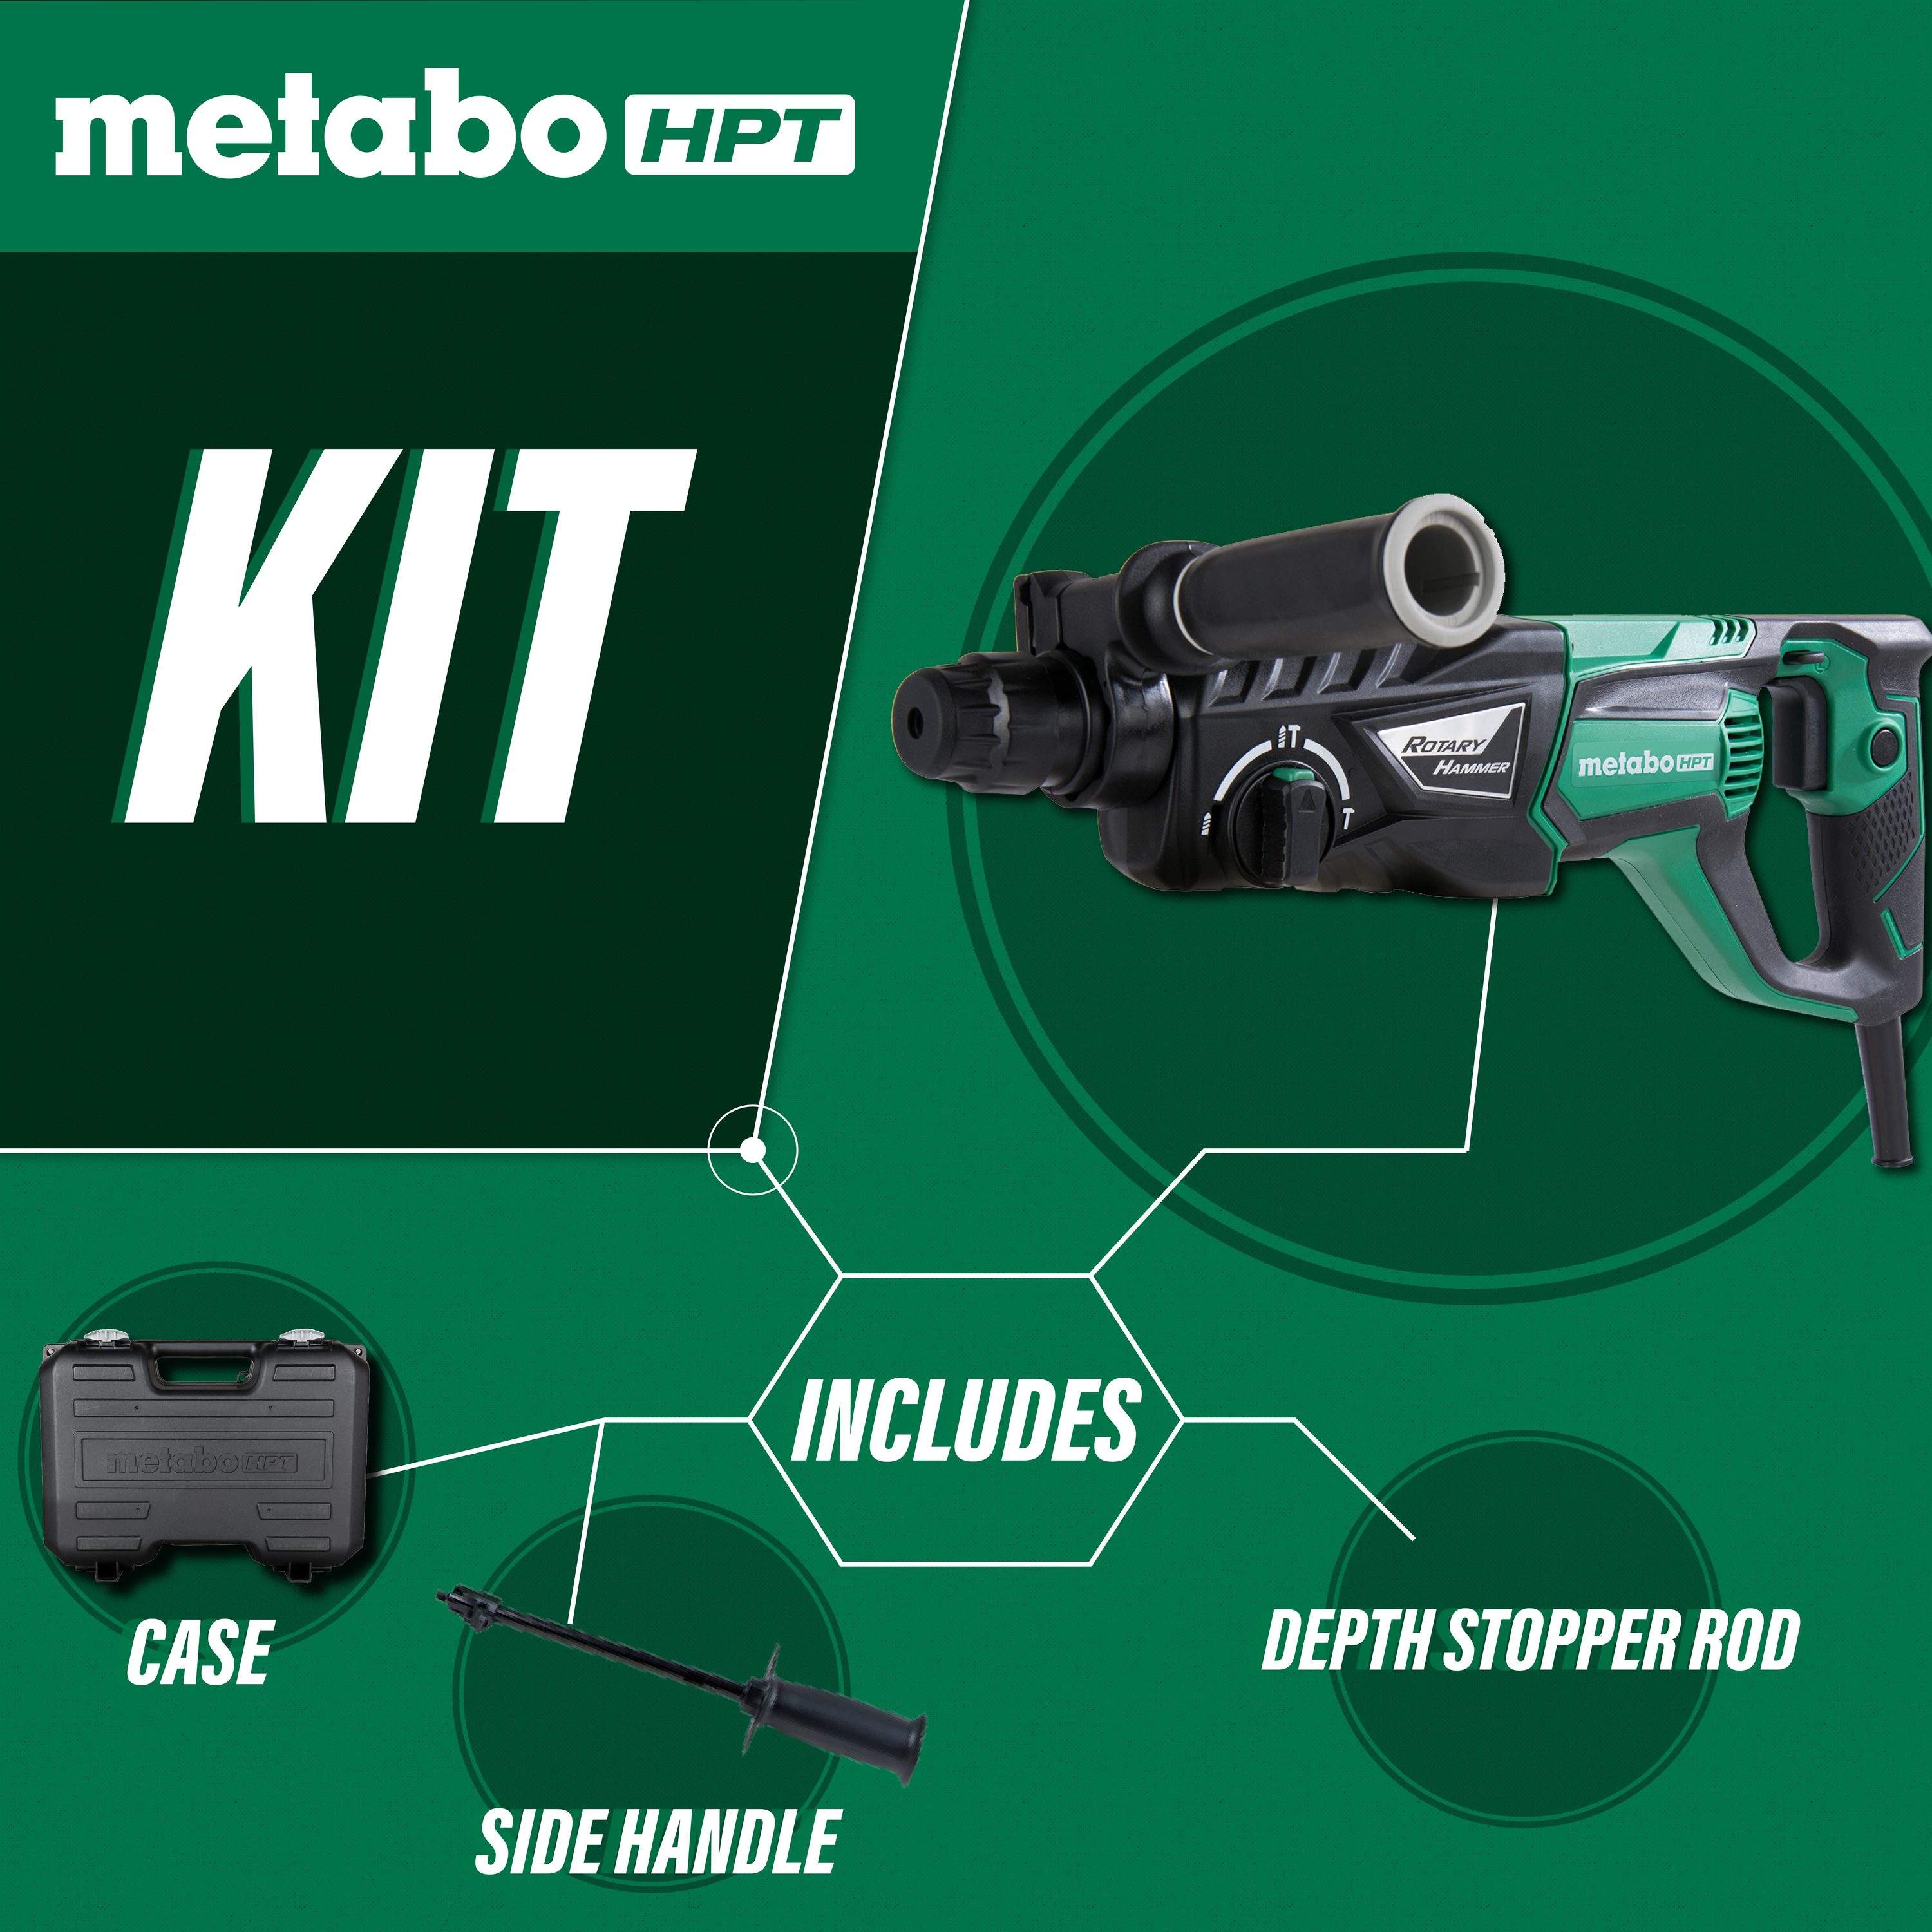 Metabo HPT Sds-plus Sds-plus Variable Speed Corded Rotary Hammer Drill (Included)